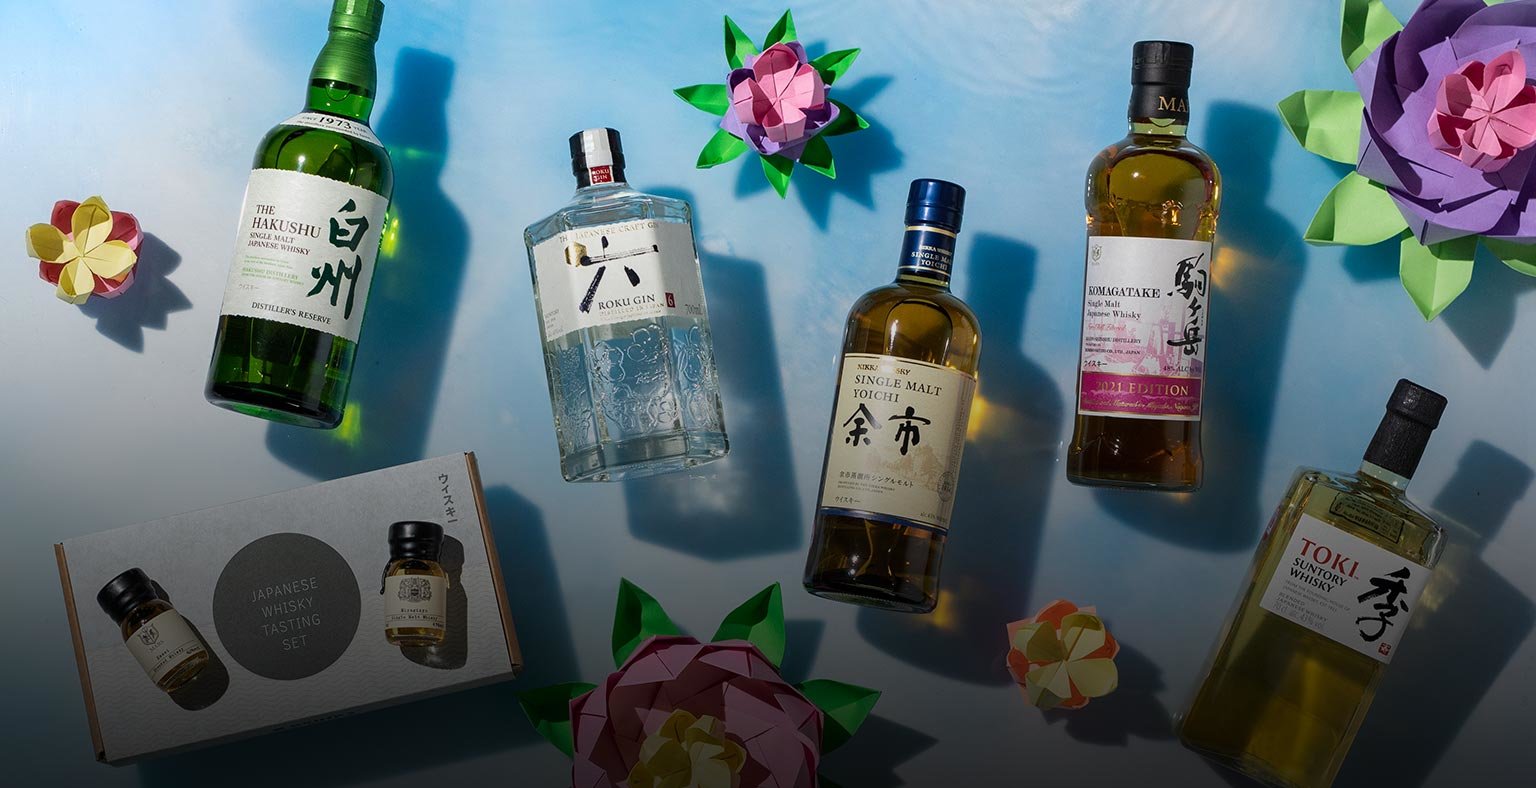 Bottles of Japanese spirits on a blue background with origami flowers